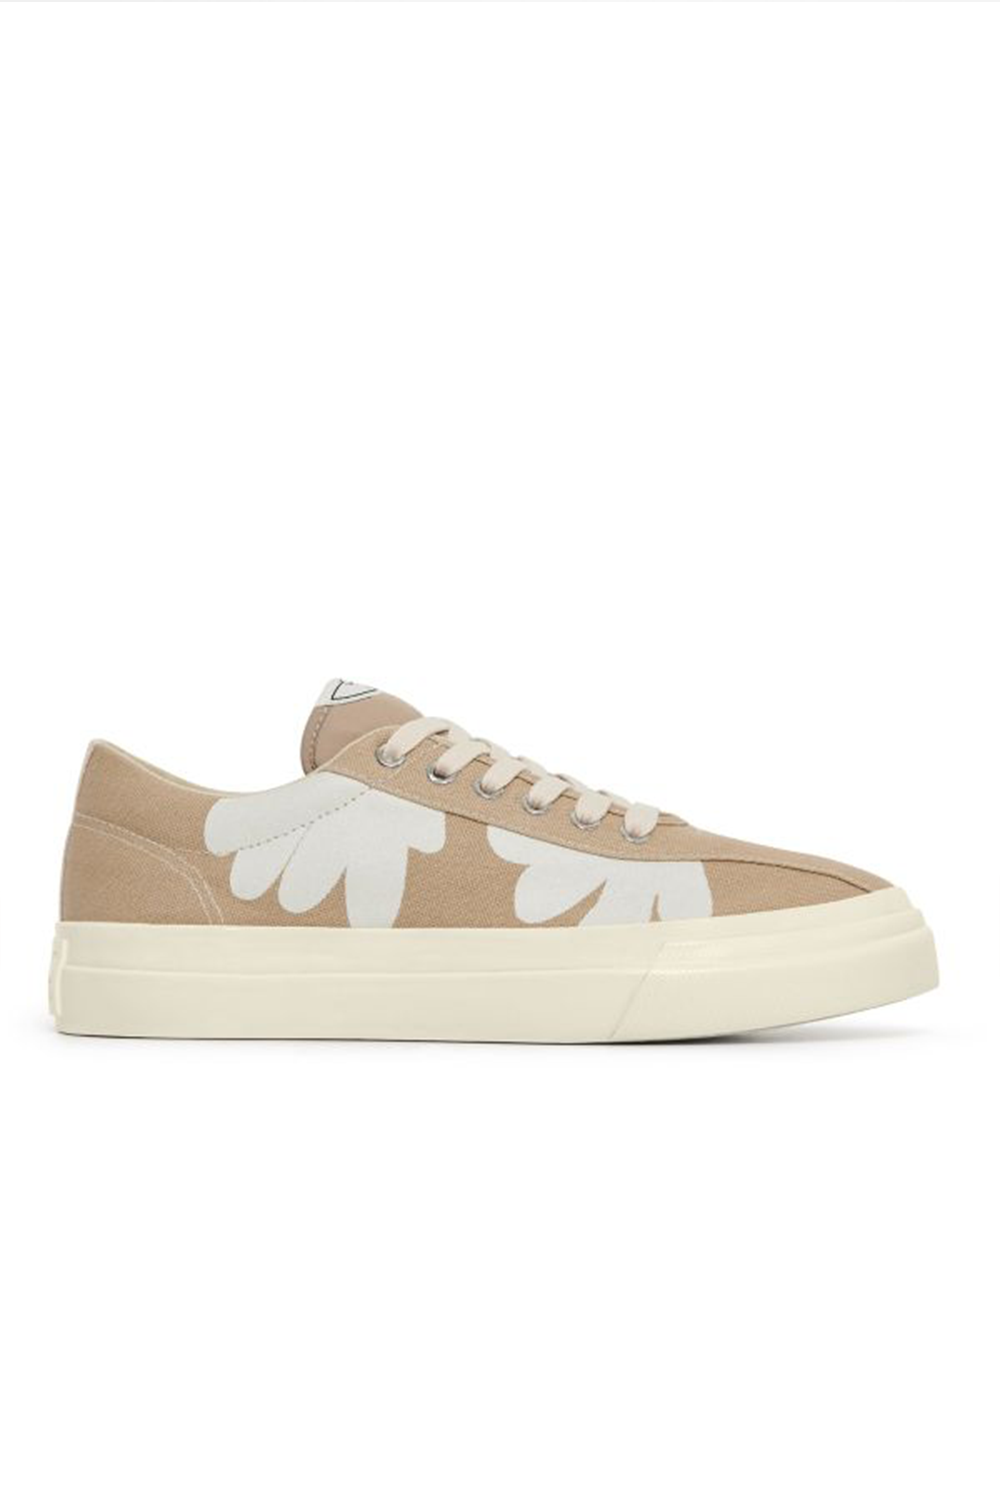 DELLOW SHROOM HANDS SAND-WHITE | Sneakers NZ | STEPNEY WORKERS CLUB NZ | Black Box Boutique Auckland | Womens Fashion NZ